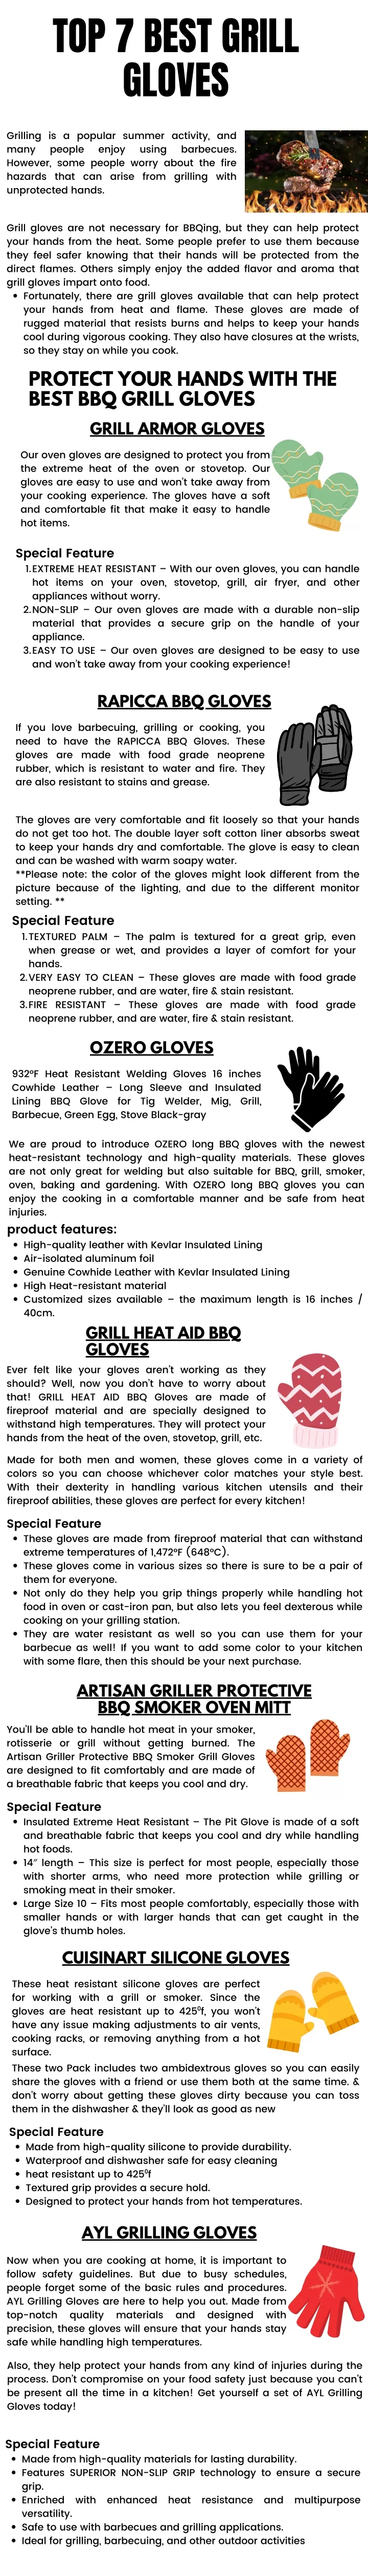 top 7 best grill gloves